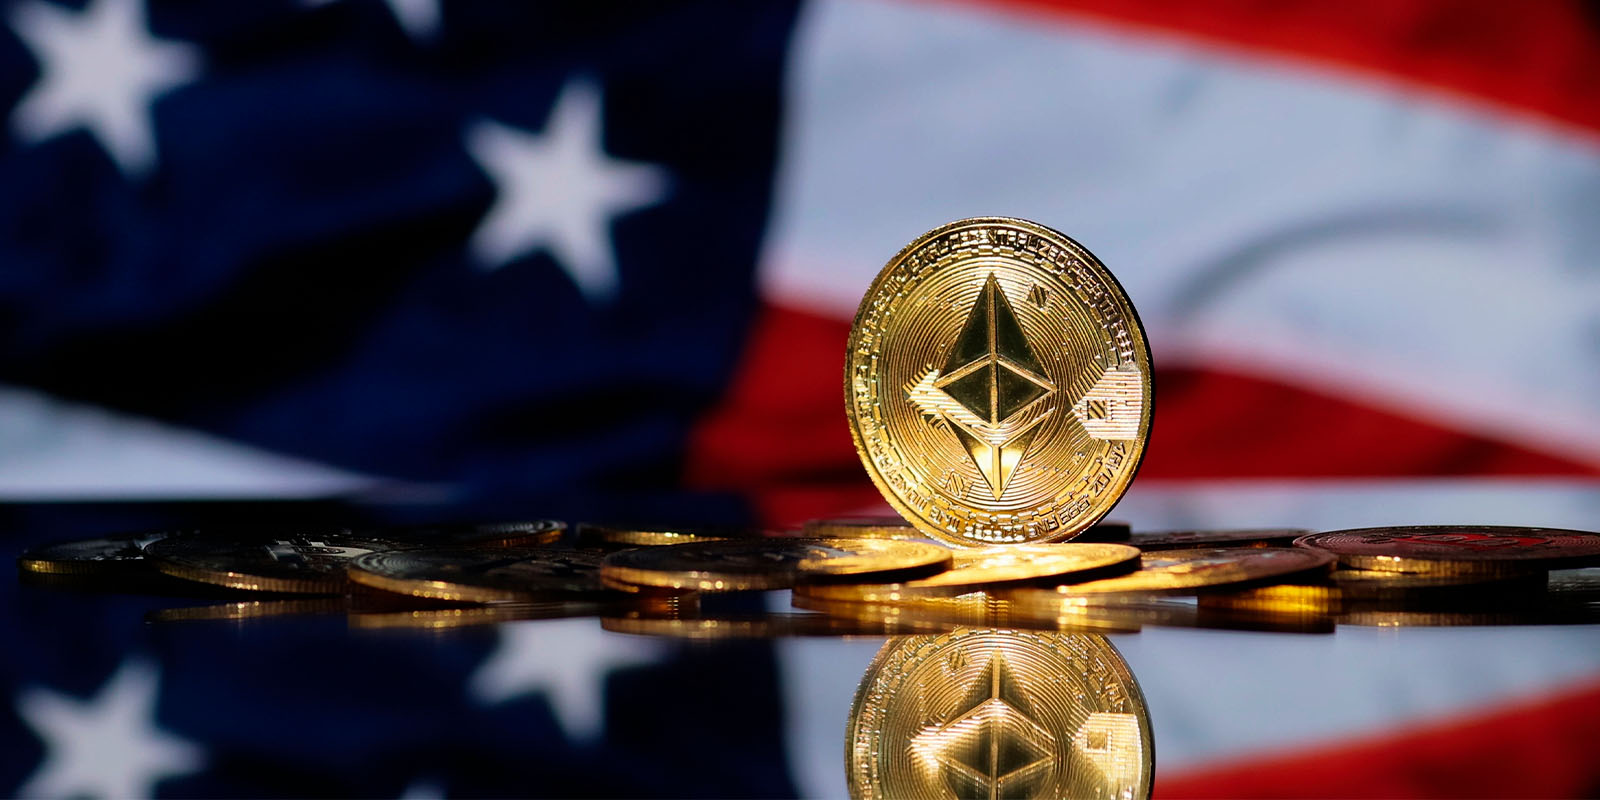 In the United States, there is a lot of regulatory uncertainty around cryptocurrency, and some states have instituted their own regulations.